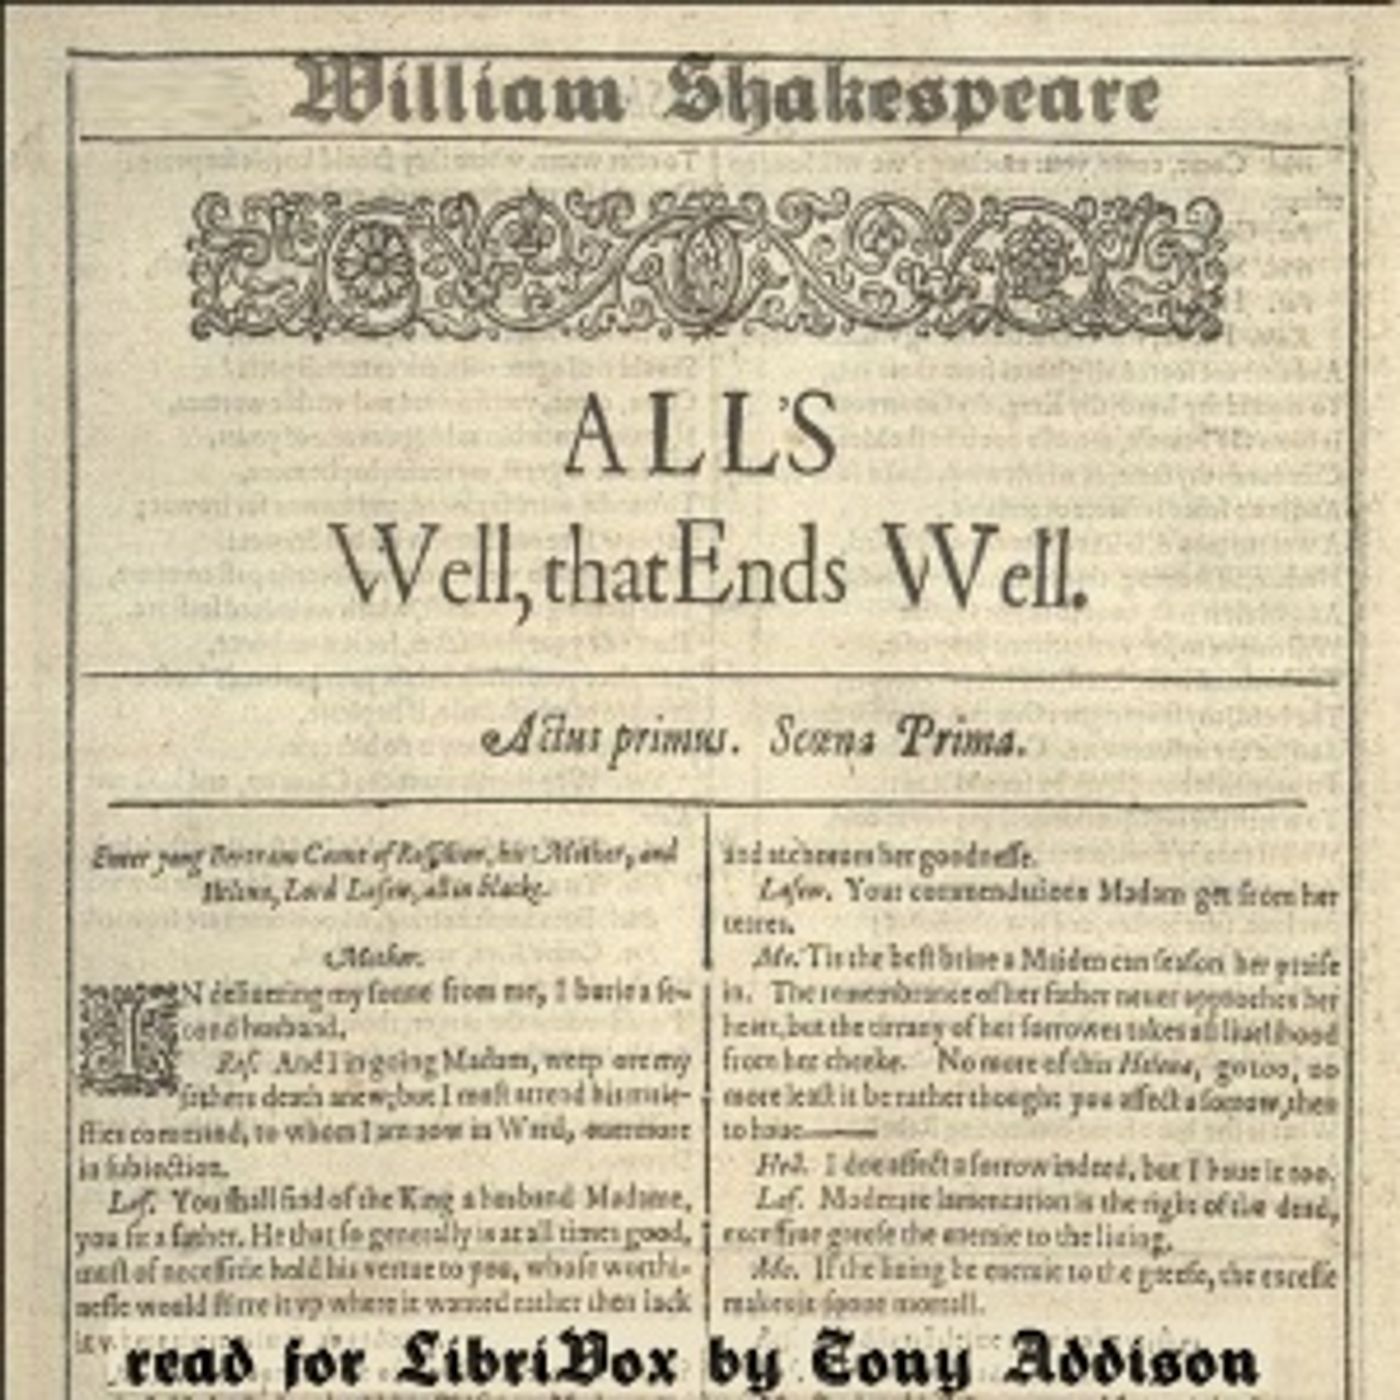 All’s Well That Ends Well (version 2) by William Shakespeare (1564 – 1616)